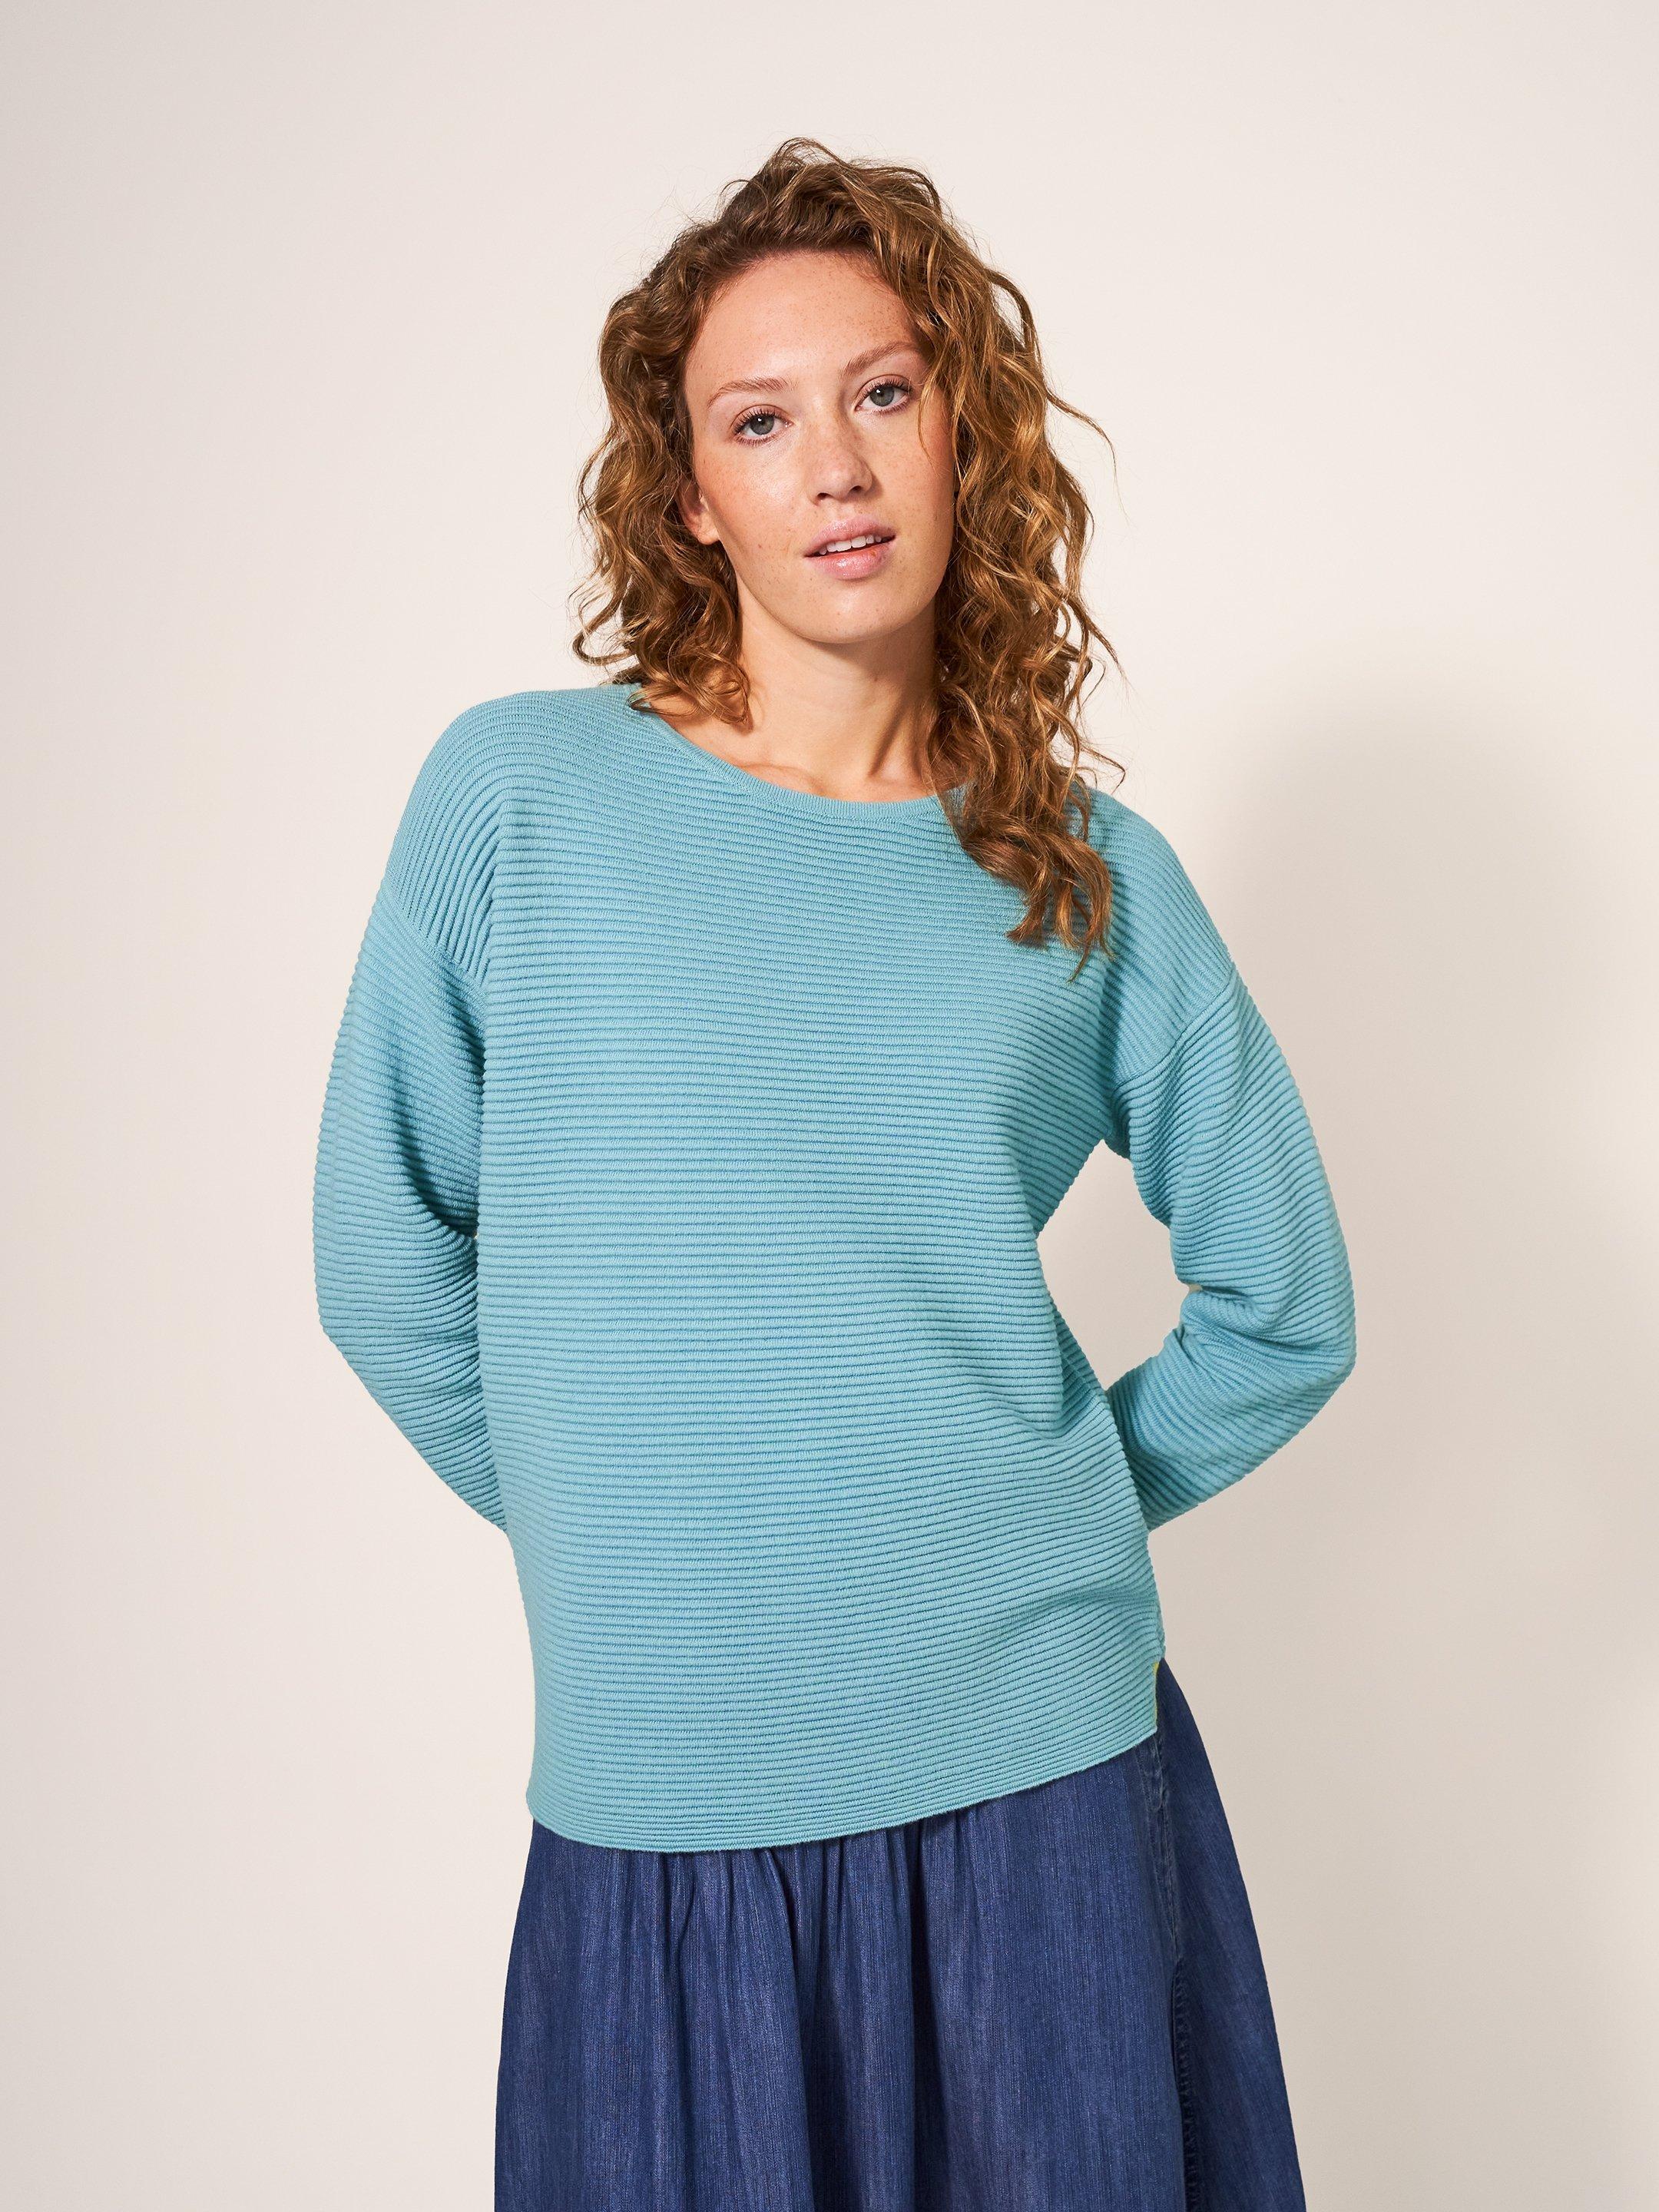 JANA JUMPER in MID TEAL - LIFESTYLE